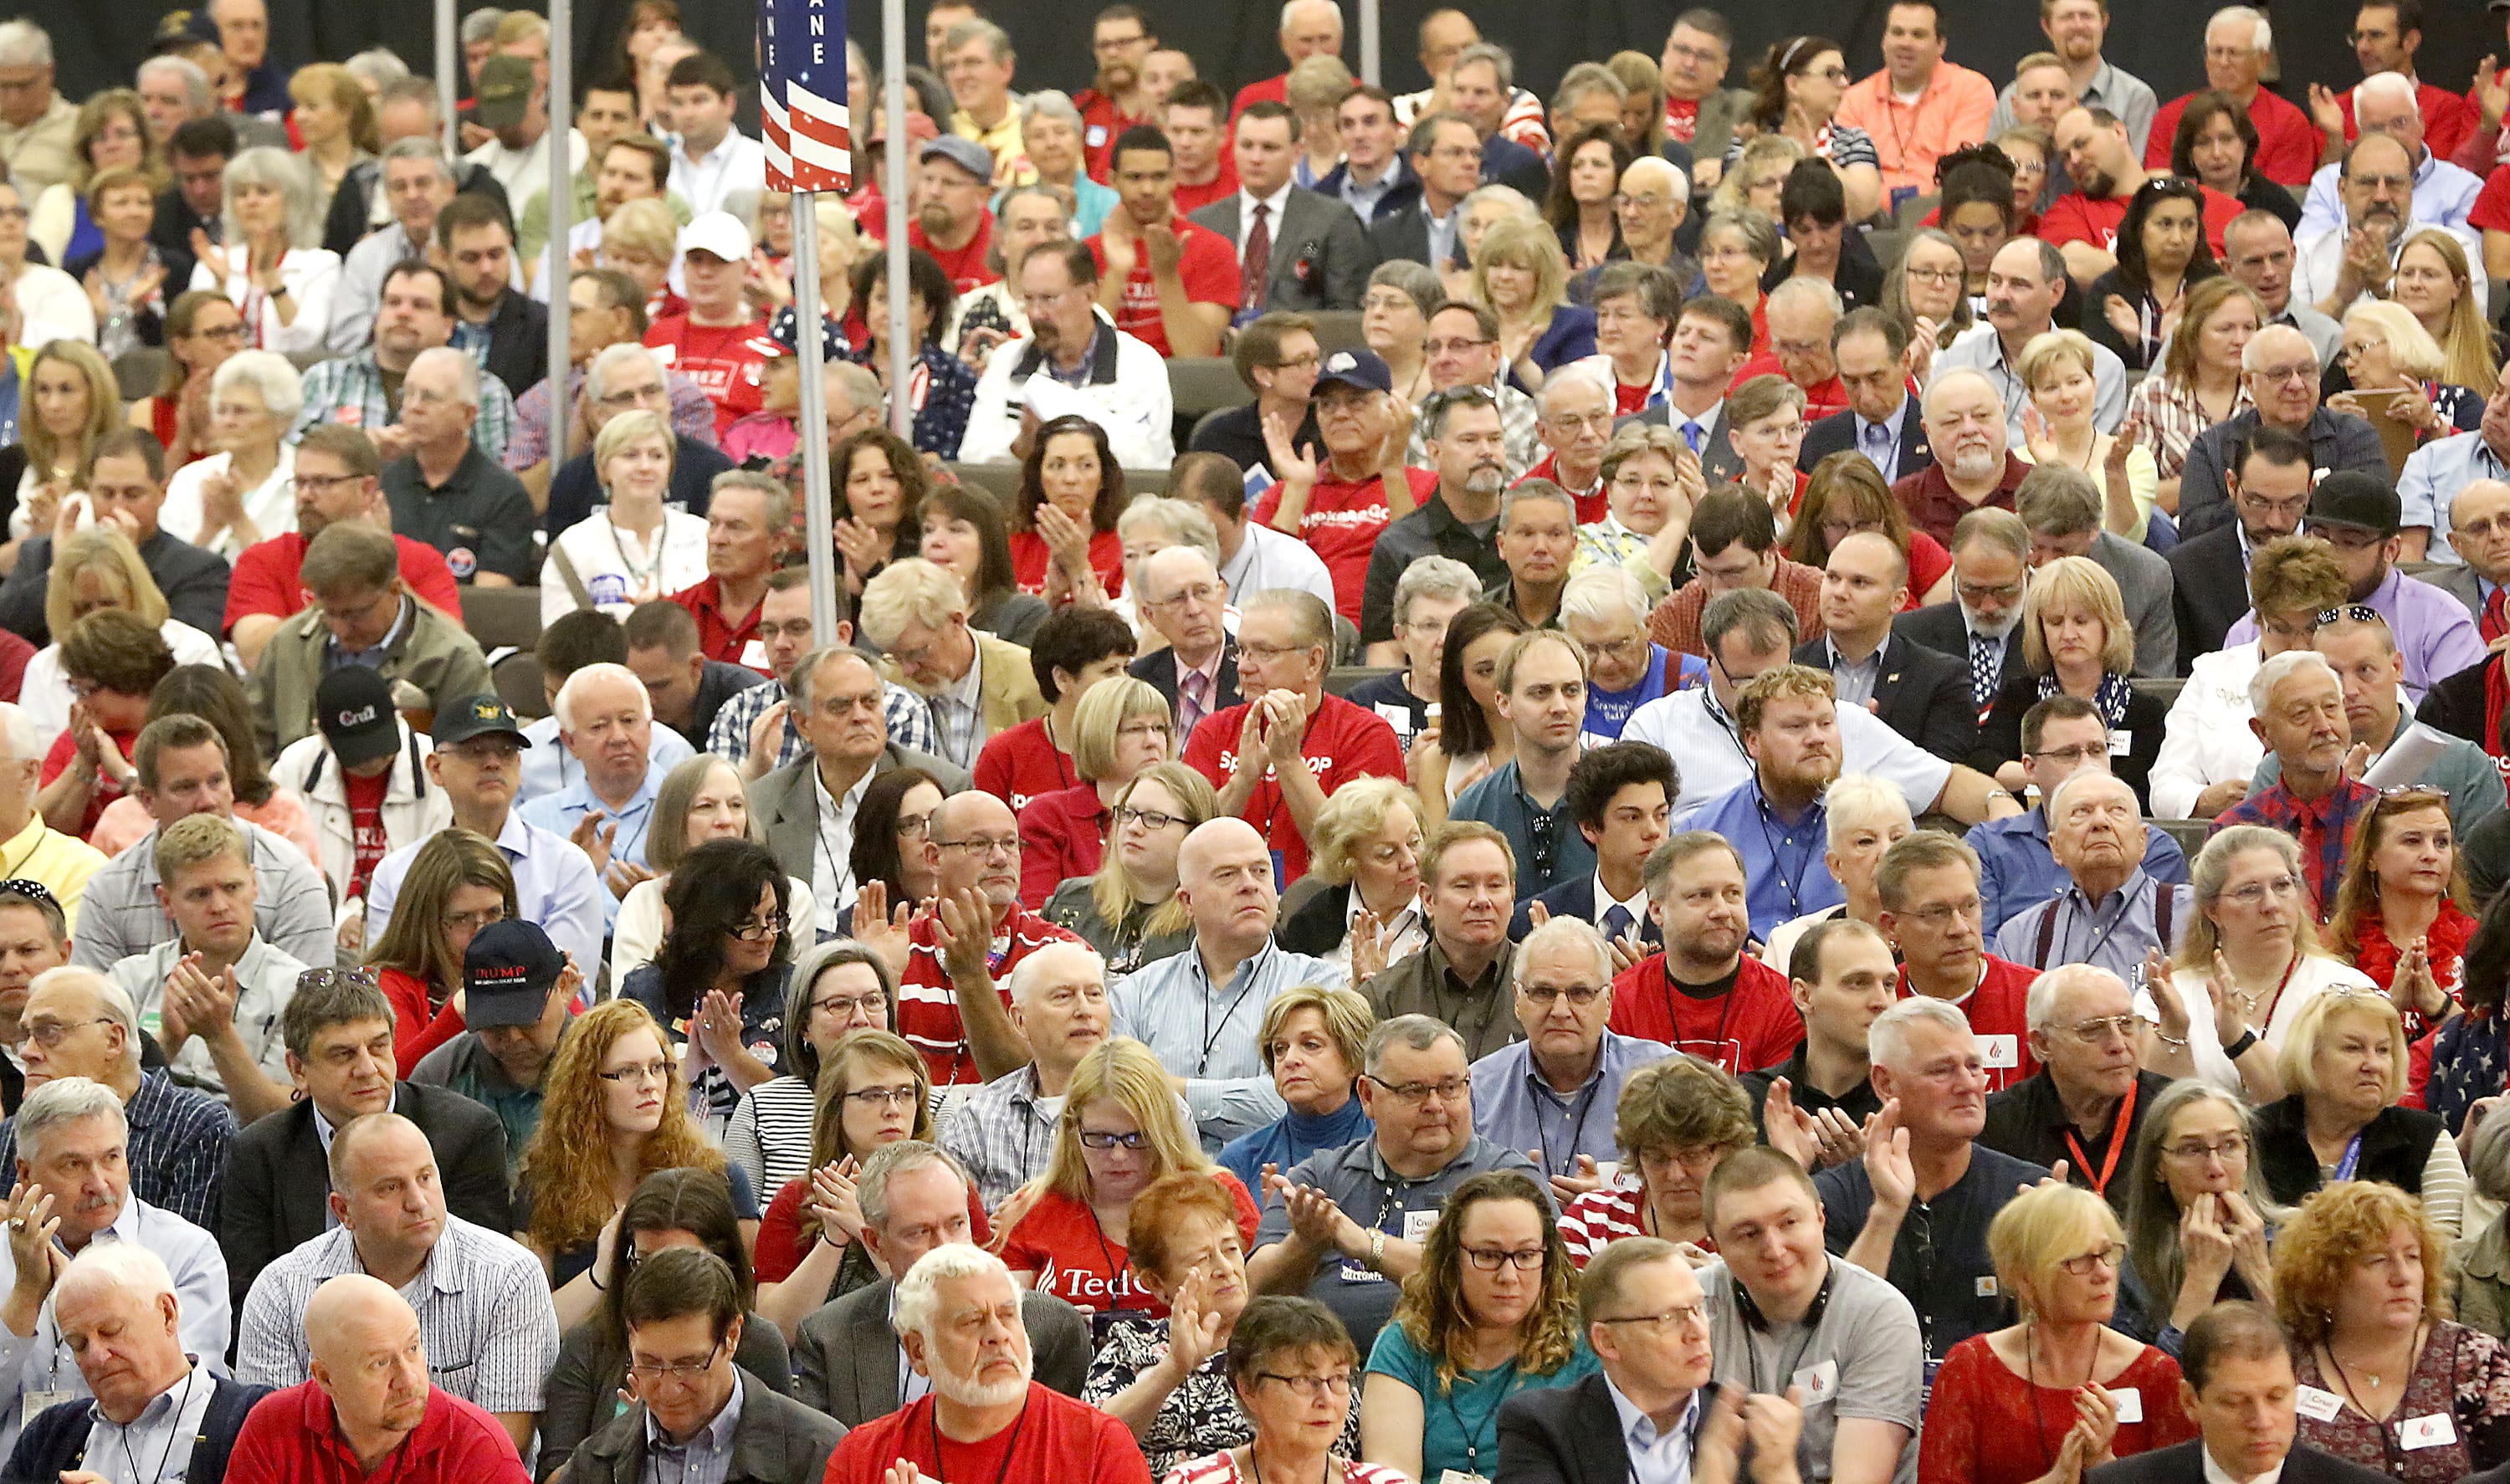 Delegates, alternates and other Republican officials listen and react to a speech by Rep. Dan Newhouse during the opening session of the Washington State Republican convention in the arena of the TRAC facility in Pasco, Wash., Friday, May 20, 2016. Republicans said they can win more statewide political offices in Washington if they are able to flip Snohomish County to the GOP side.